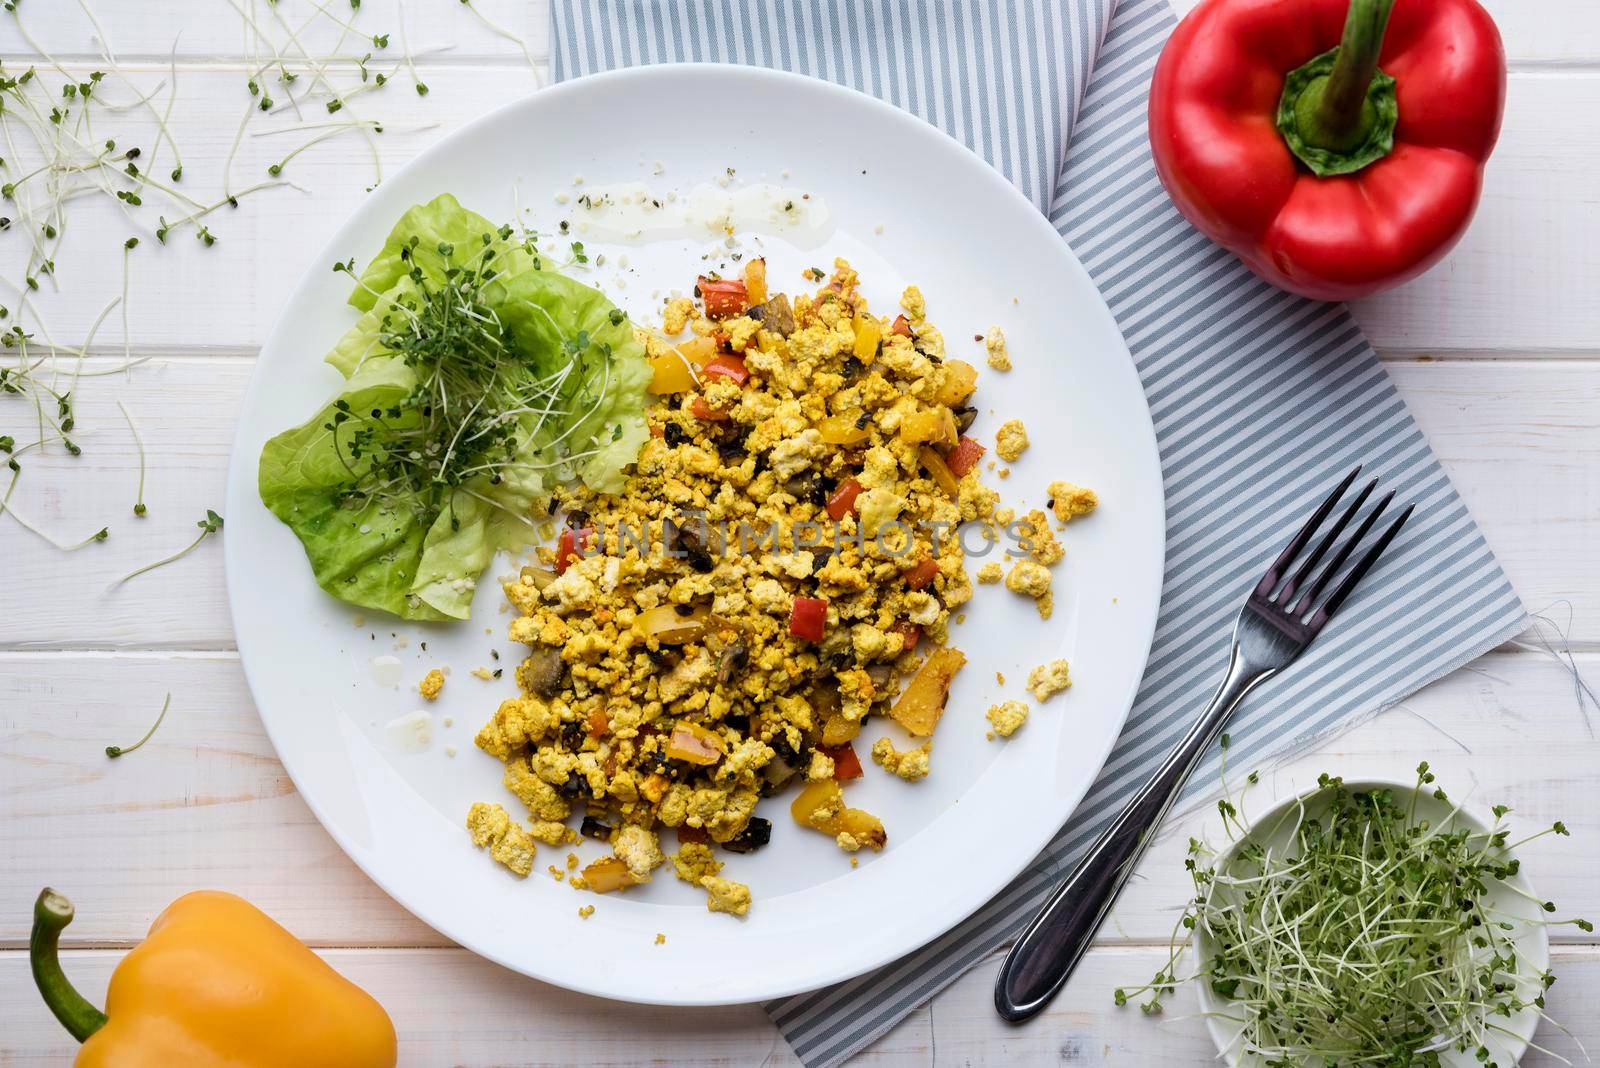 scrambled eggs veggies salad with sweet peppers by Zahard